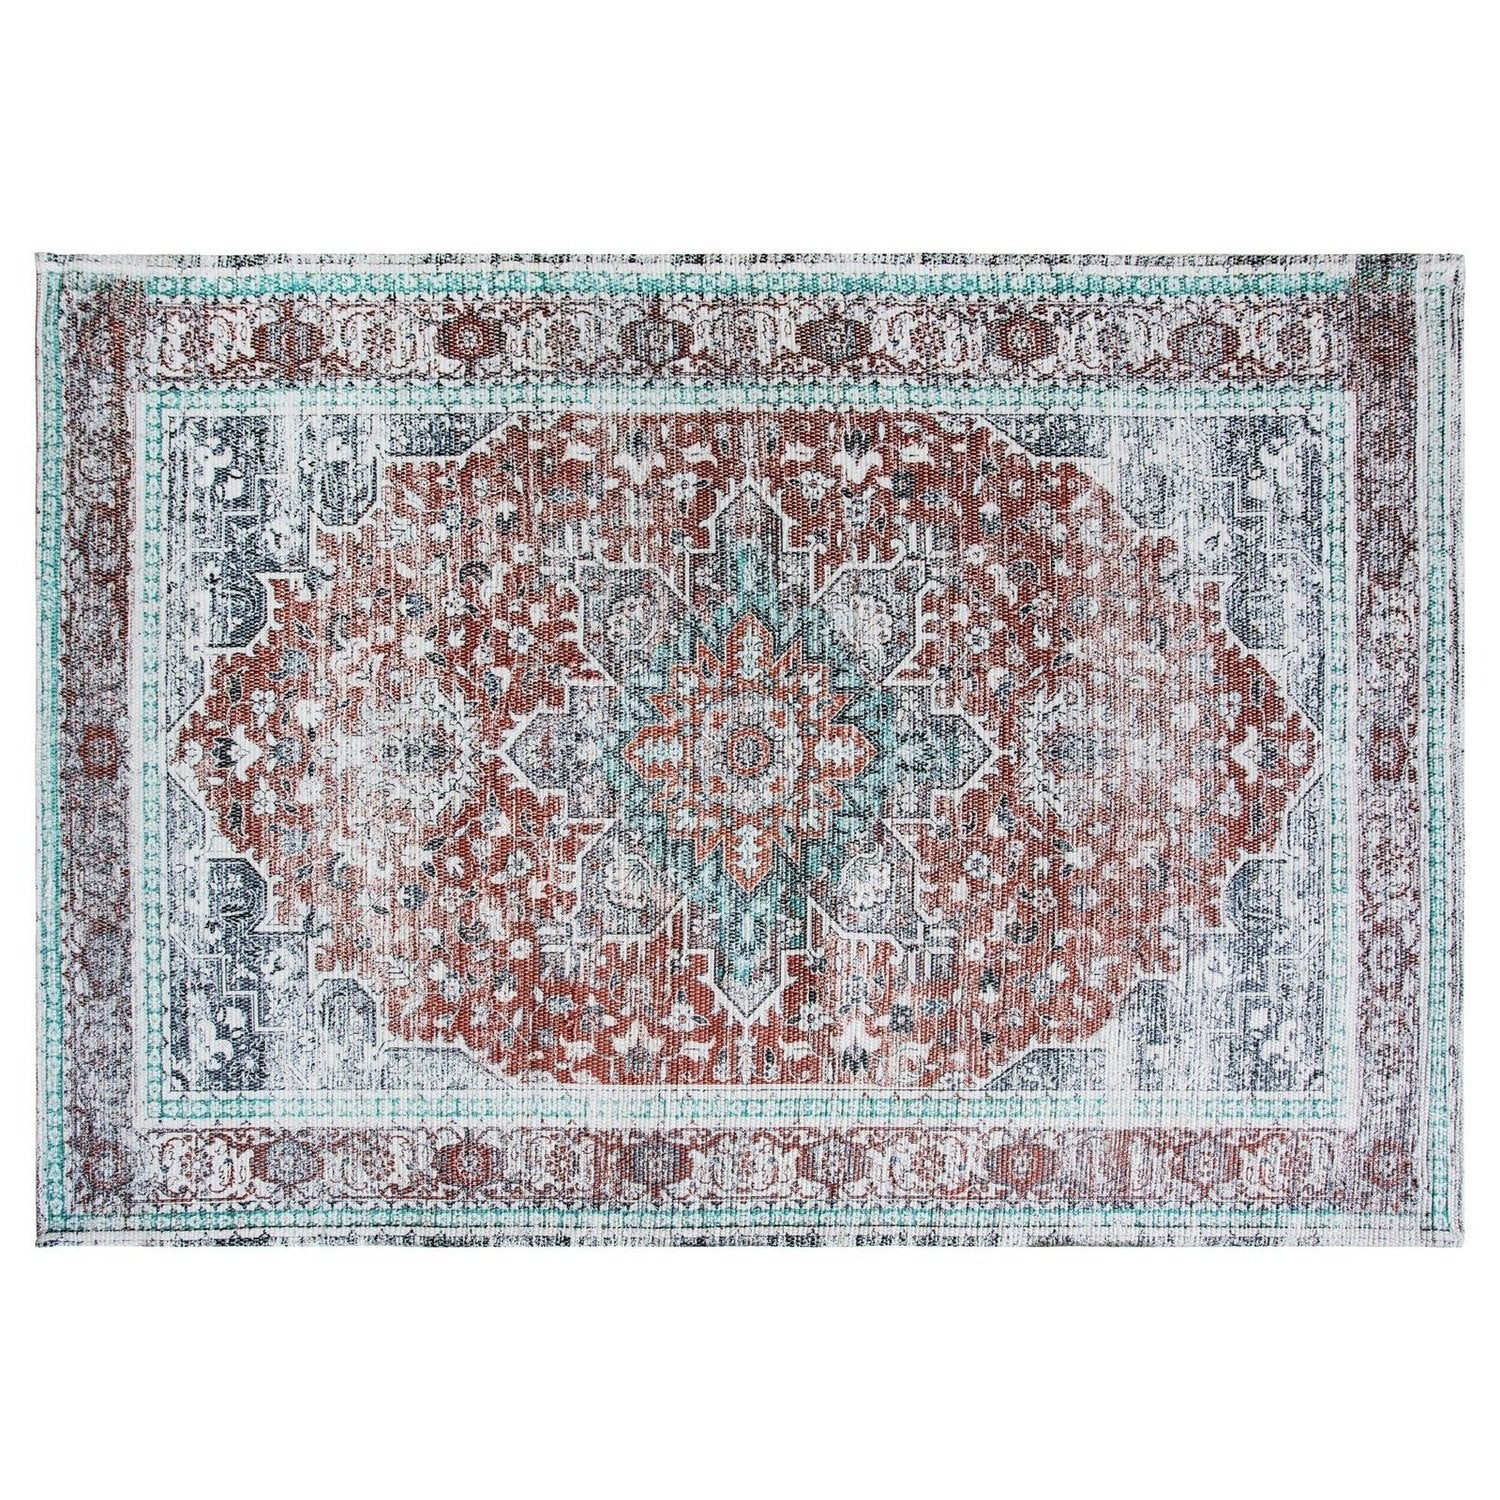 Canberra Ornate Rug - Cotton Digital Print - Carpeted Reverse - 100% Polyester - Flat Weave